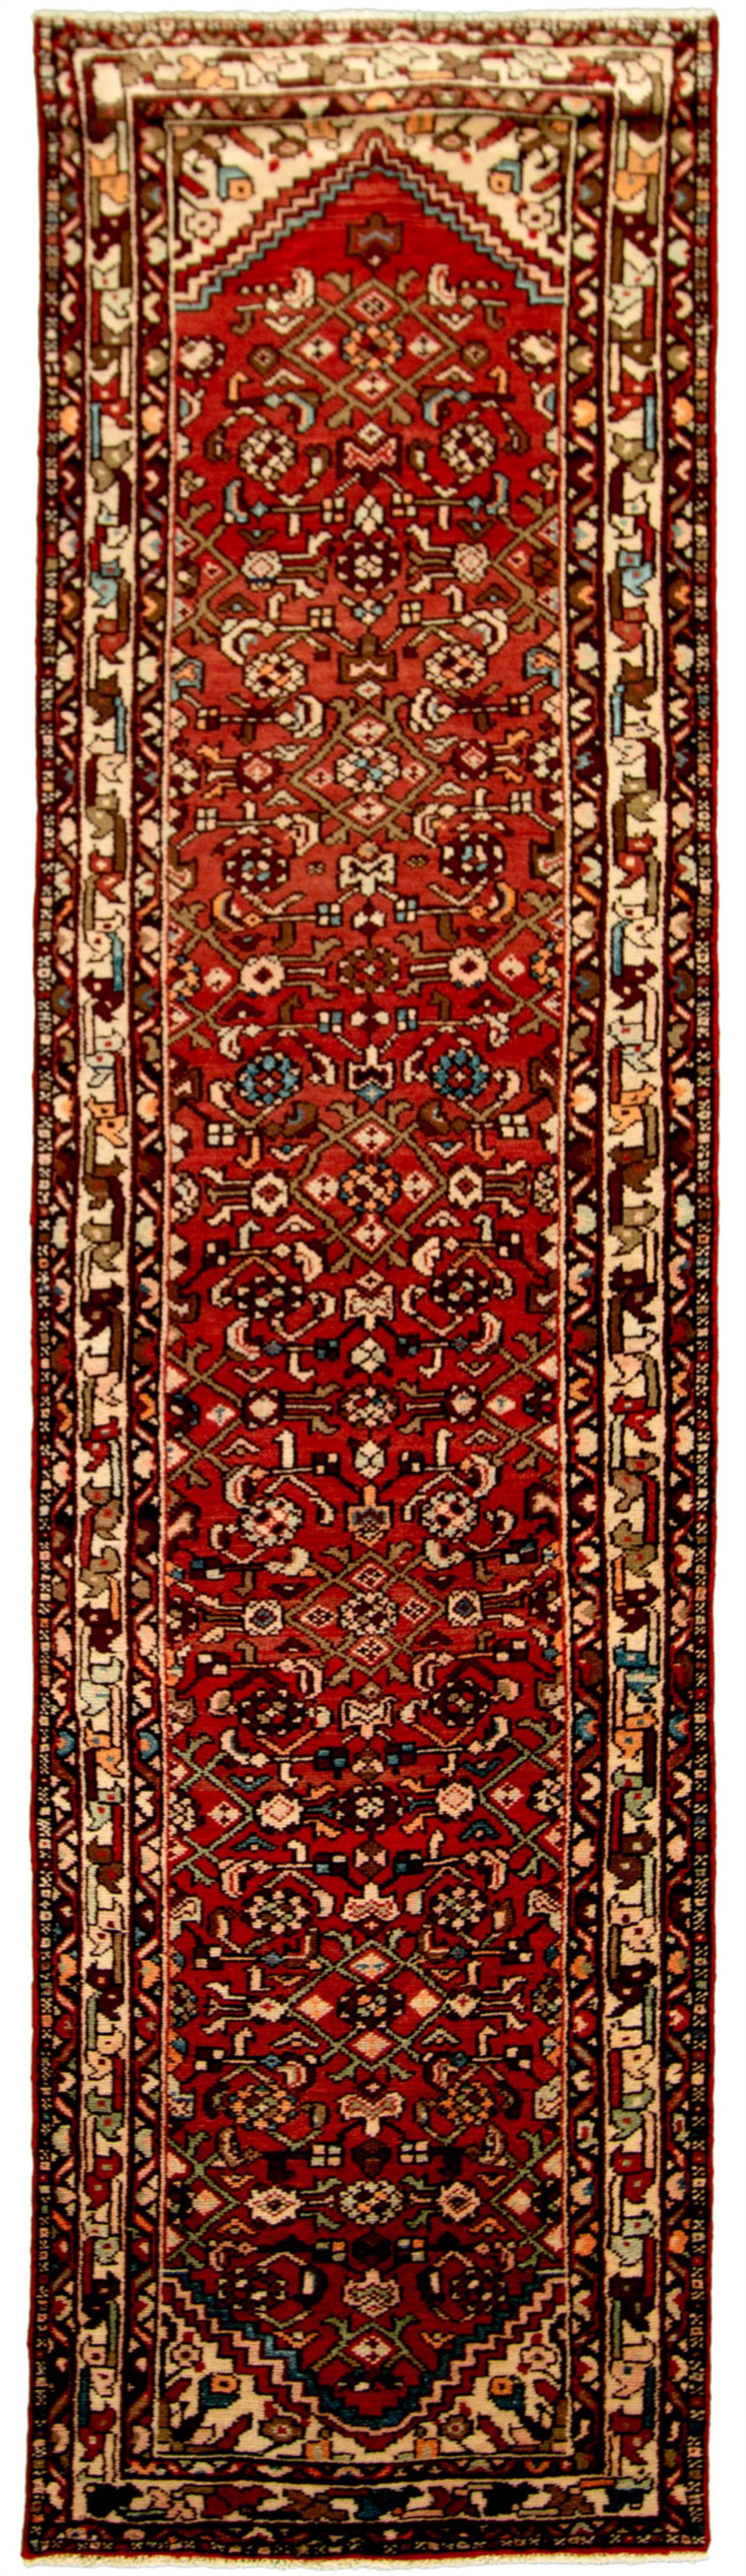 Hand-knotted Hamadan , Red Wool Rug 2'9" x 10'5" Size: 2'9" x 10'5"  